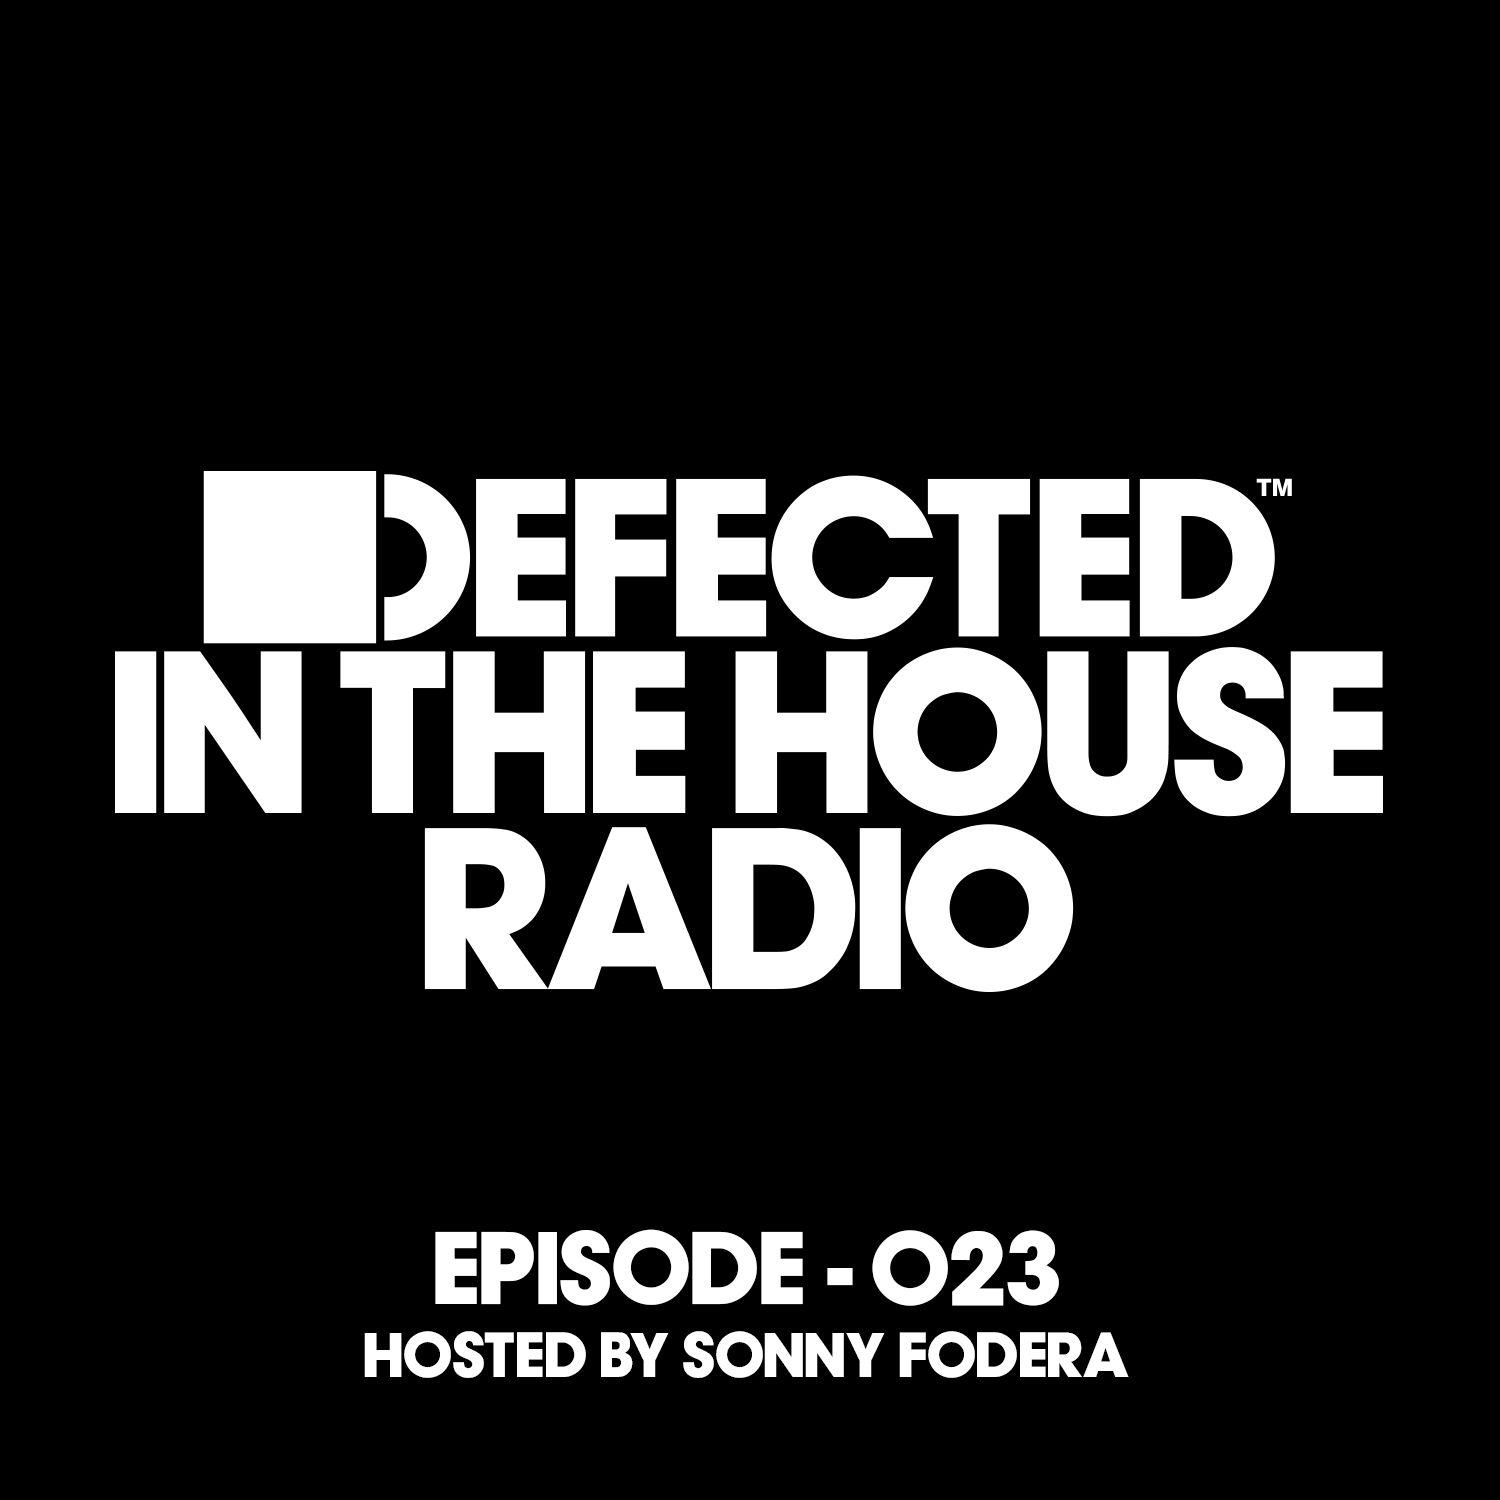 Defected In The House Radio Show Episode 023 (hosted by Sonny Fodera) [Mixed]